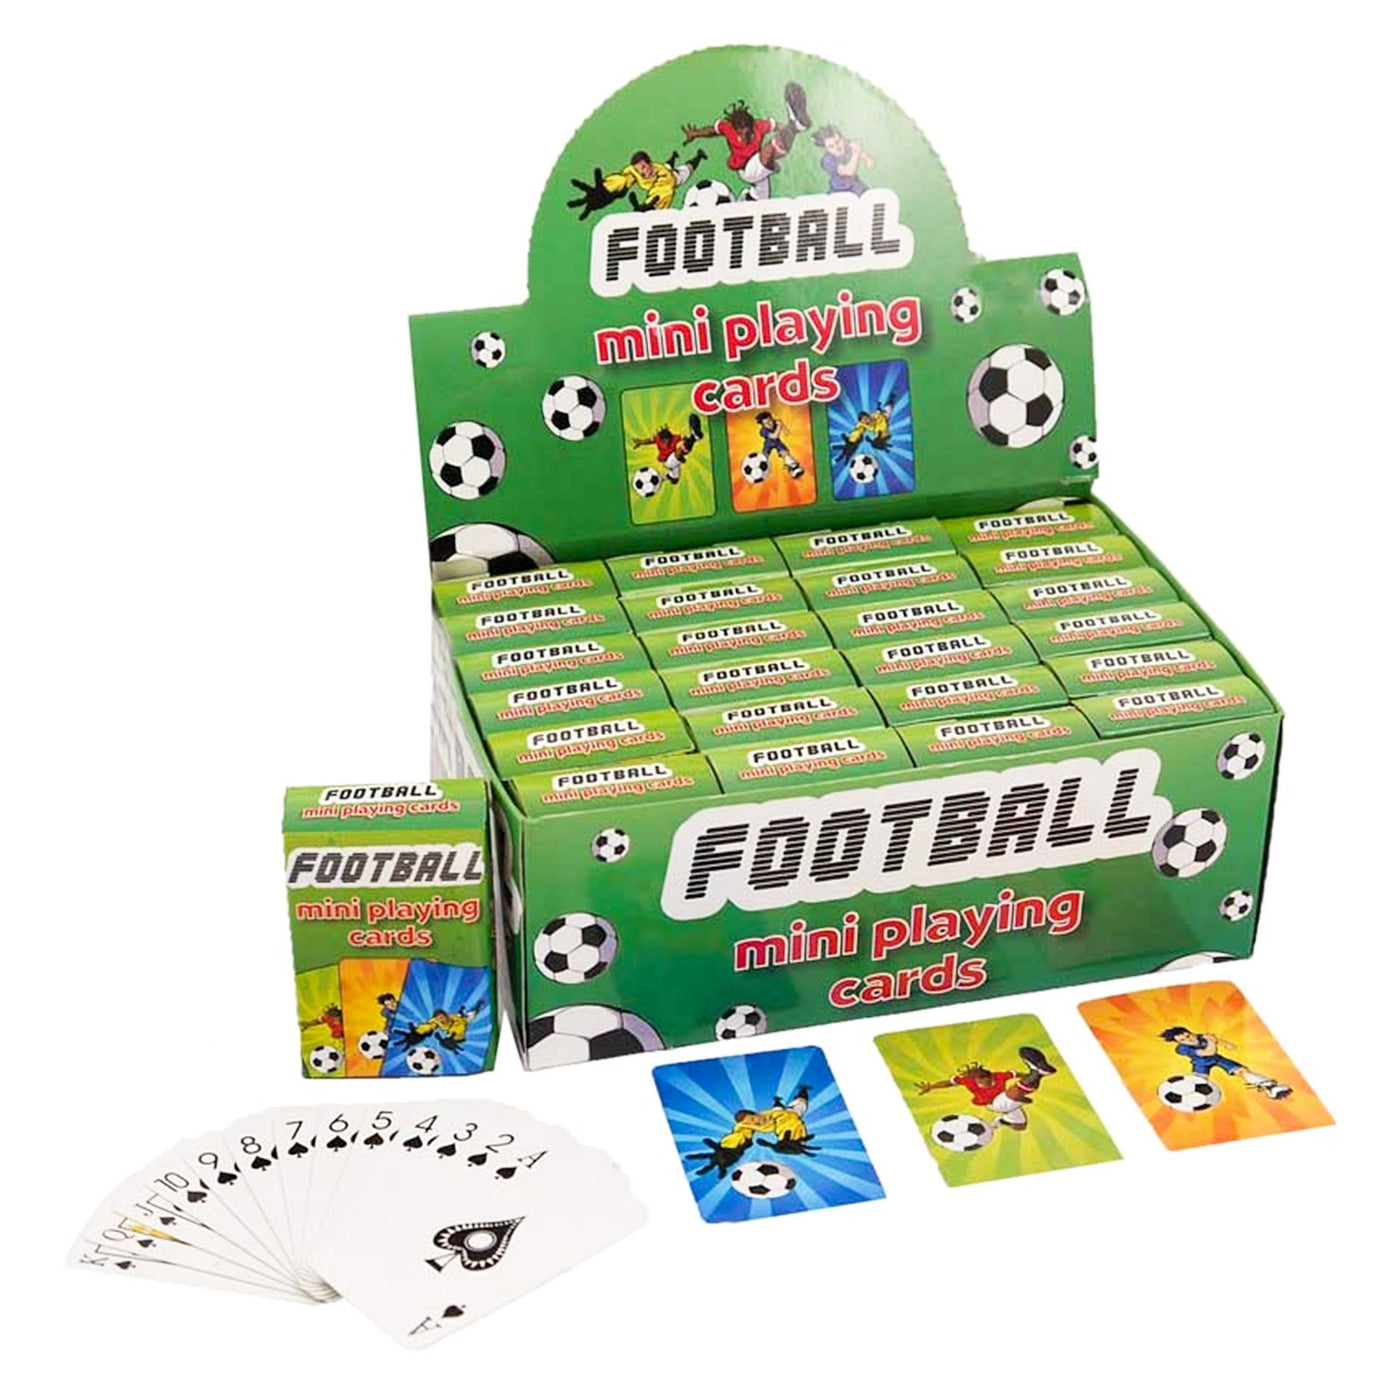 Children's Pre-filled Football Green Birthday Party Bags With Novelty Toys And Sweets.